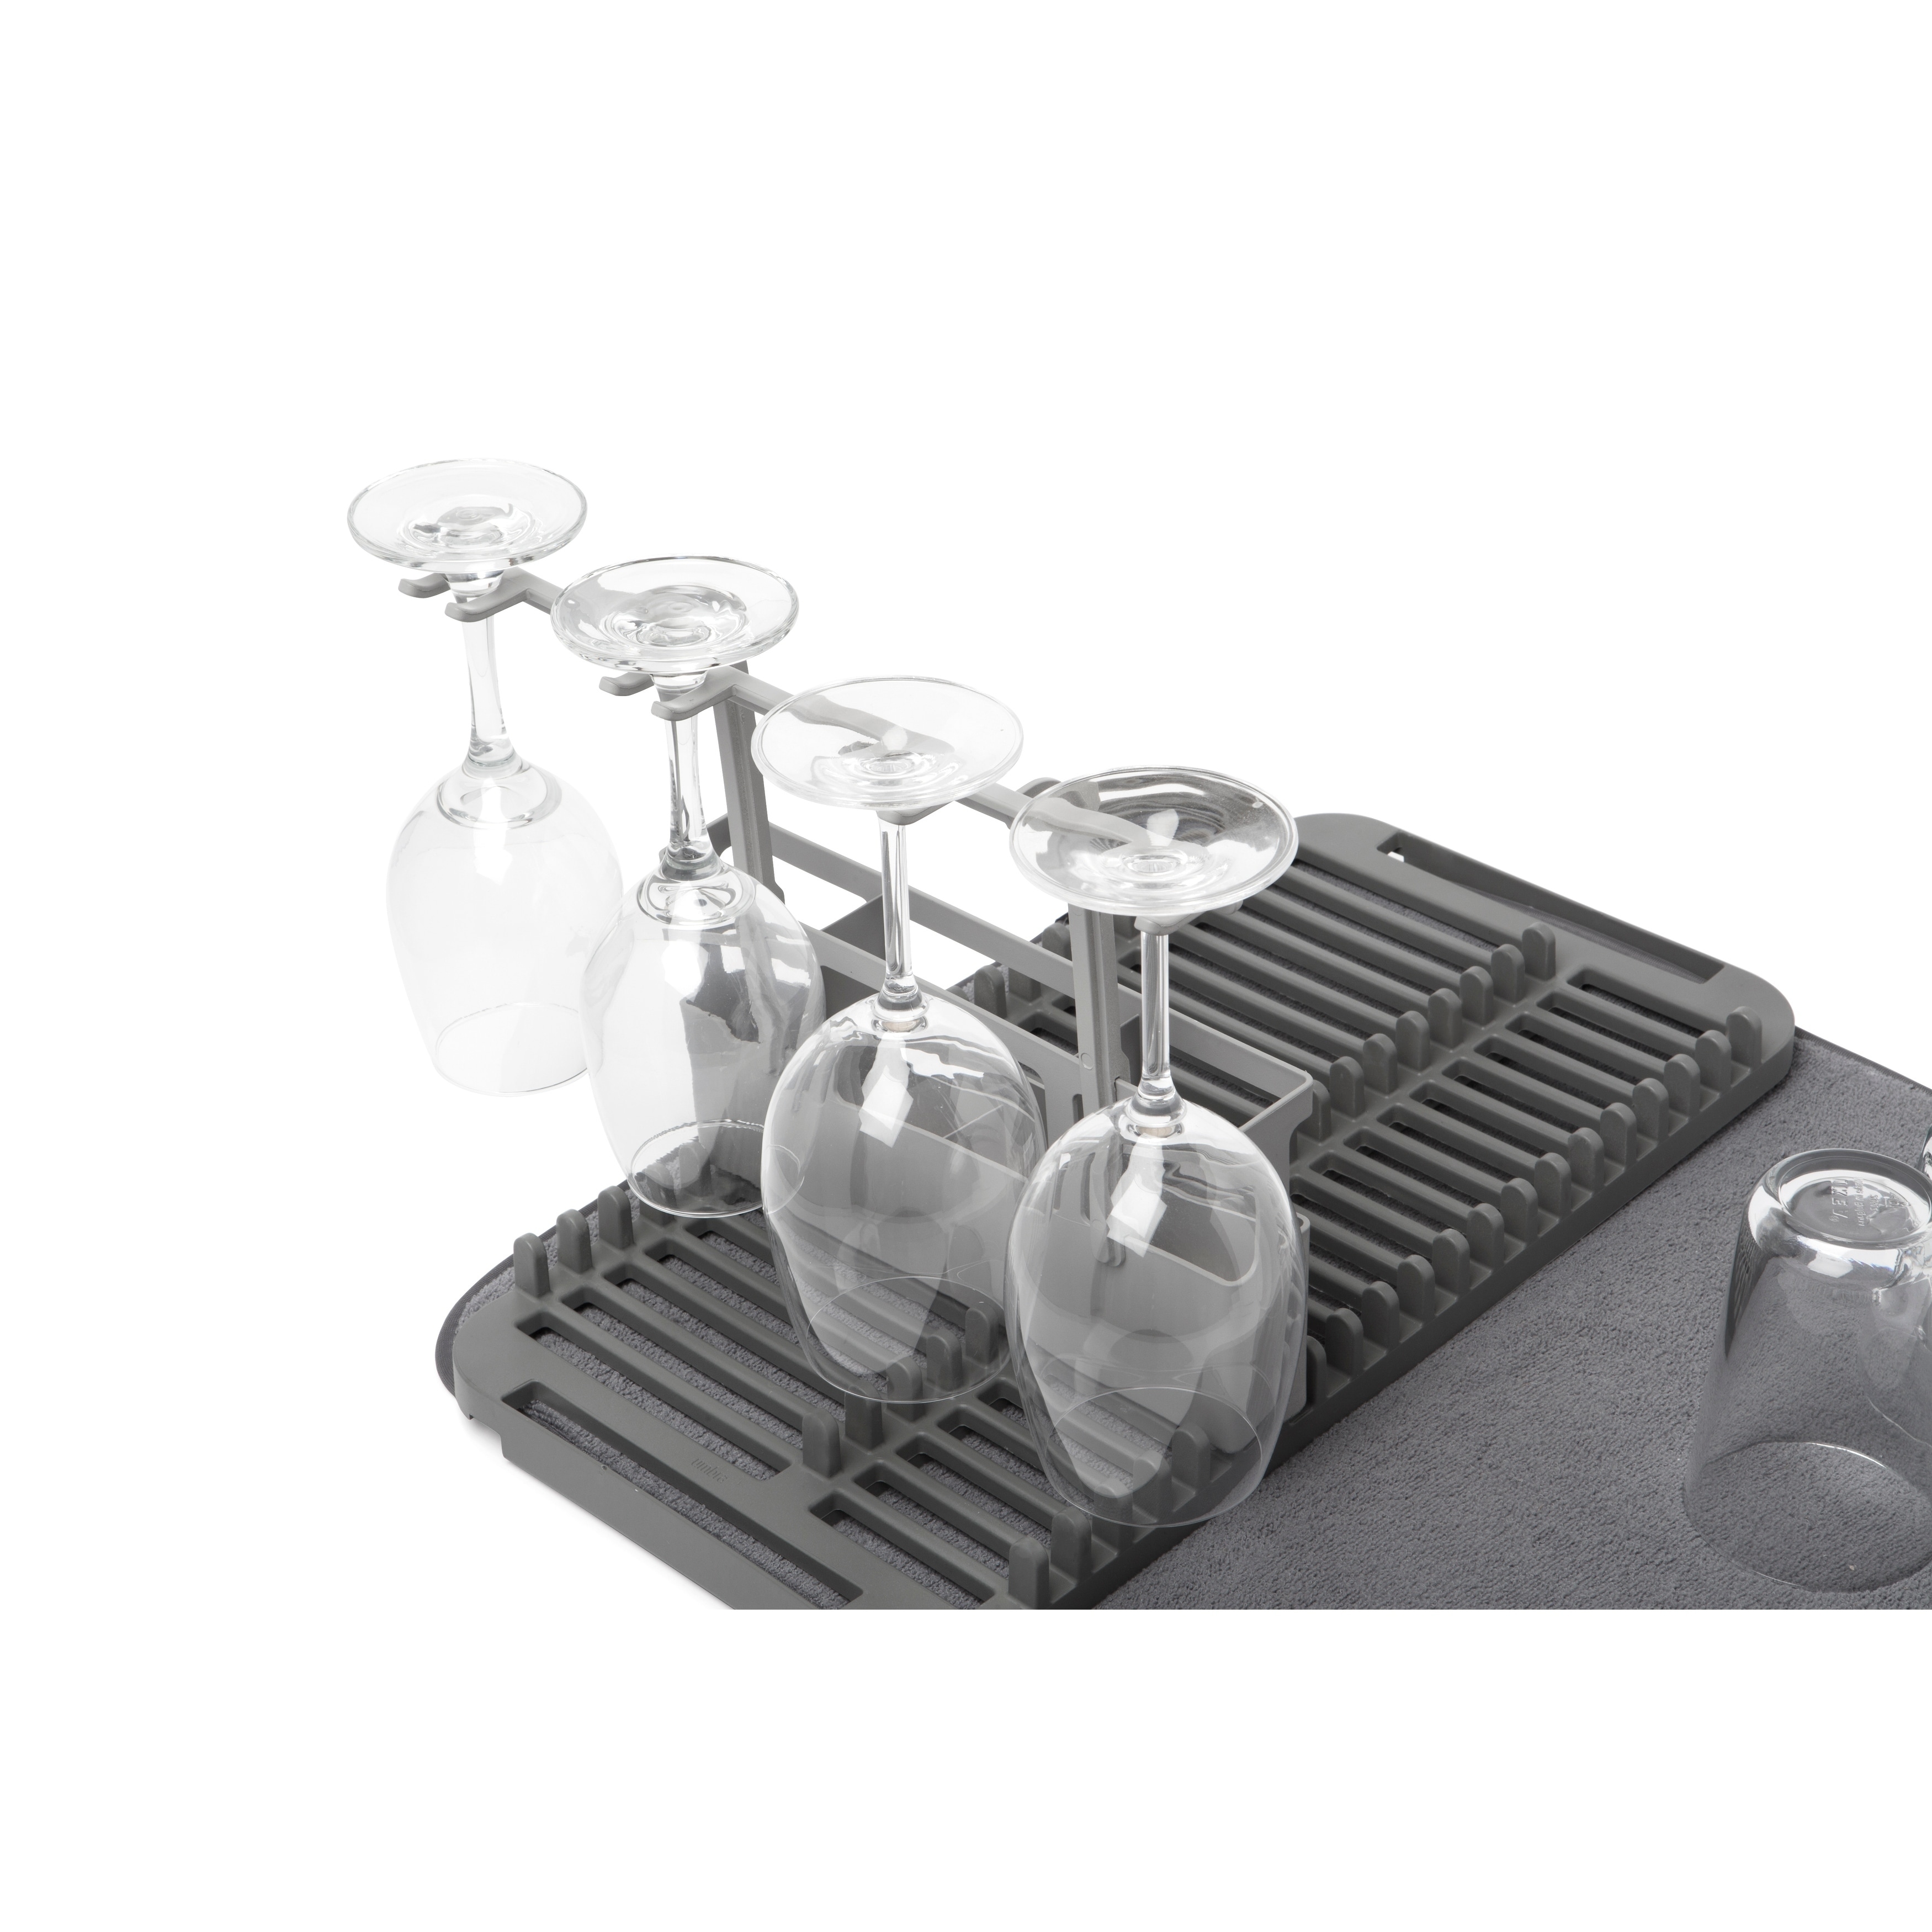 https://ak1.ostkcdn.com/images/products/28700780/Umbra-UDRY-Dish-Drying-Rack-and-Microfiber-Dish-Mat-with-Stemware-Holder-and-Utensil-Caddy-ecfaaefc-3572-4d5d-8e3e-b41e294b1efb.jpg